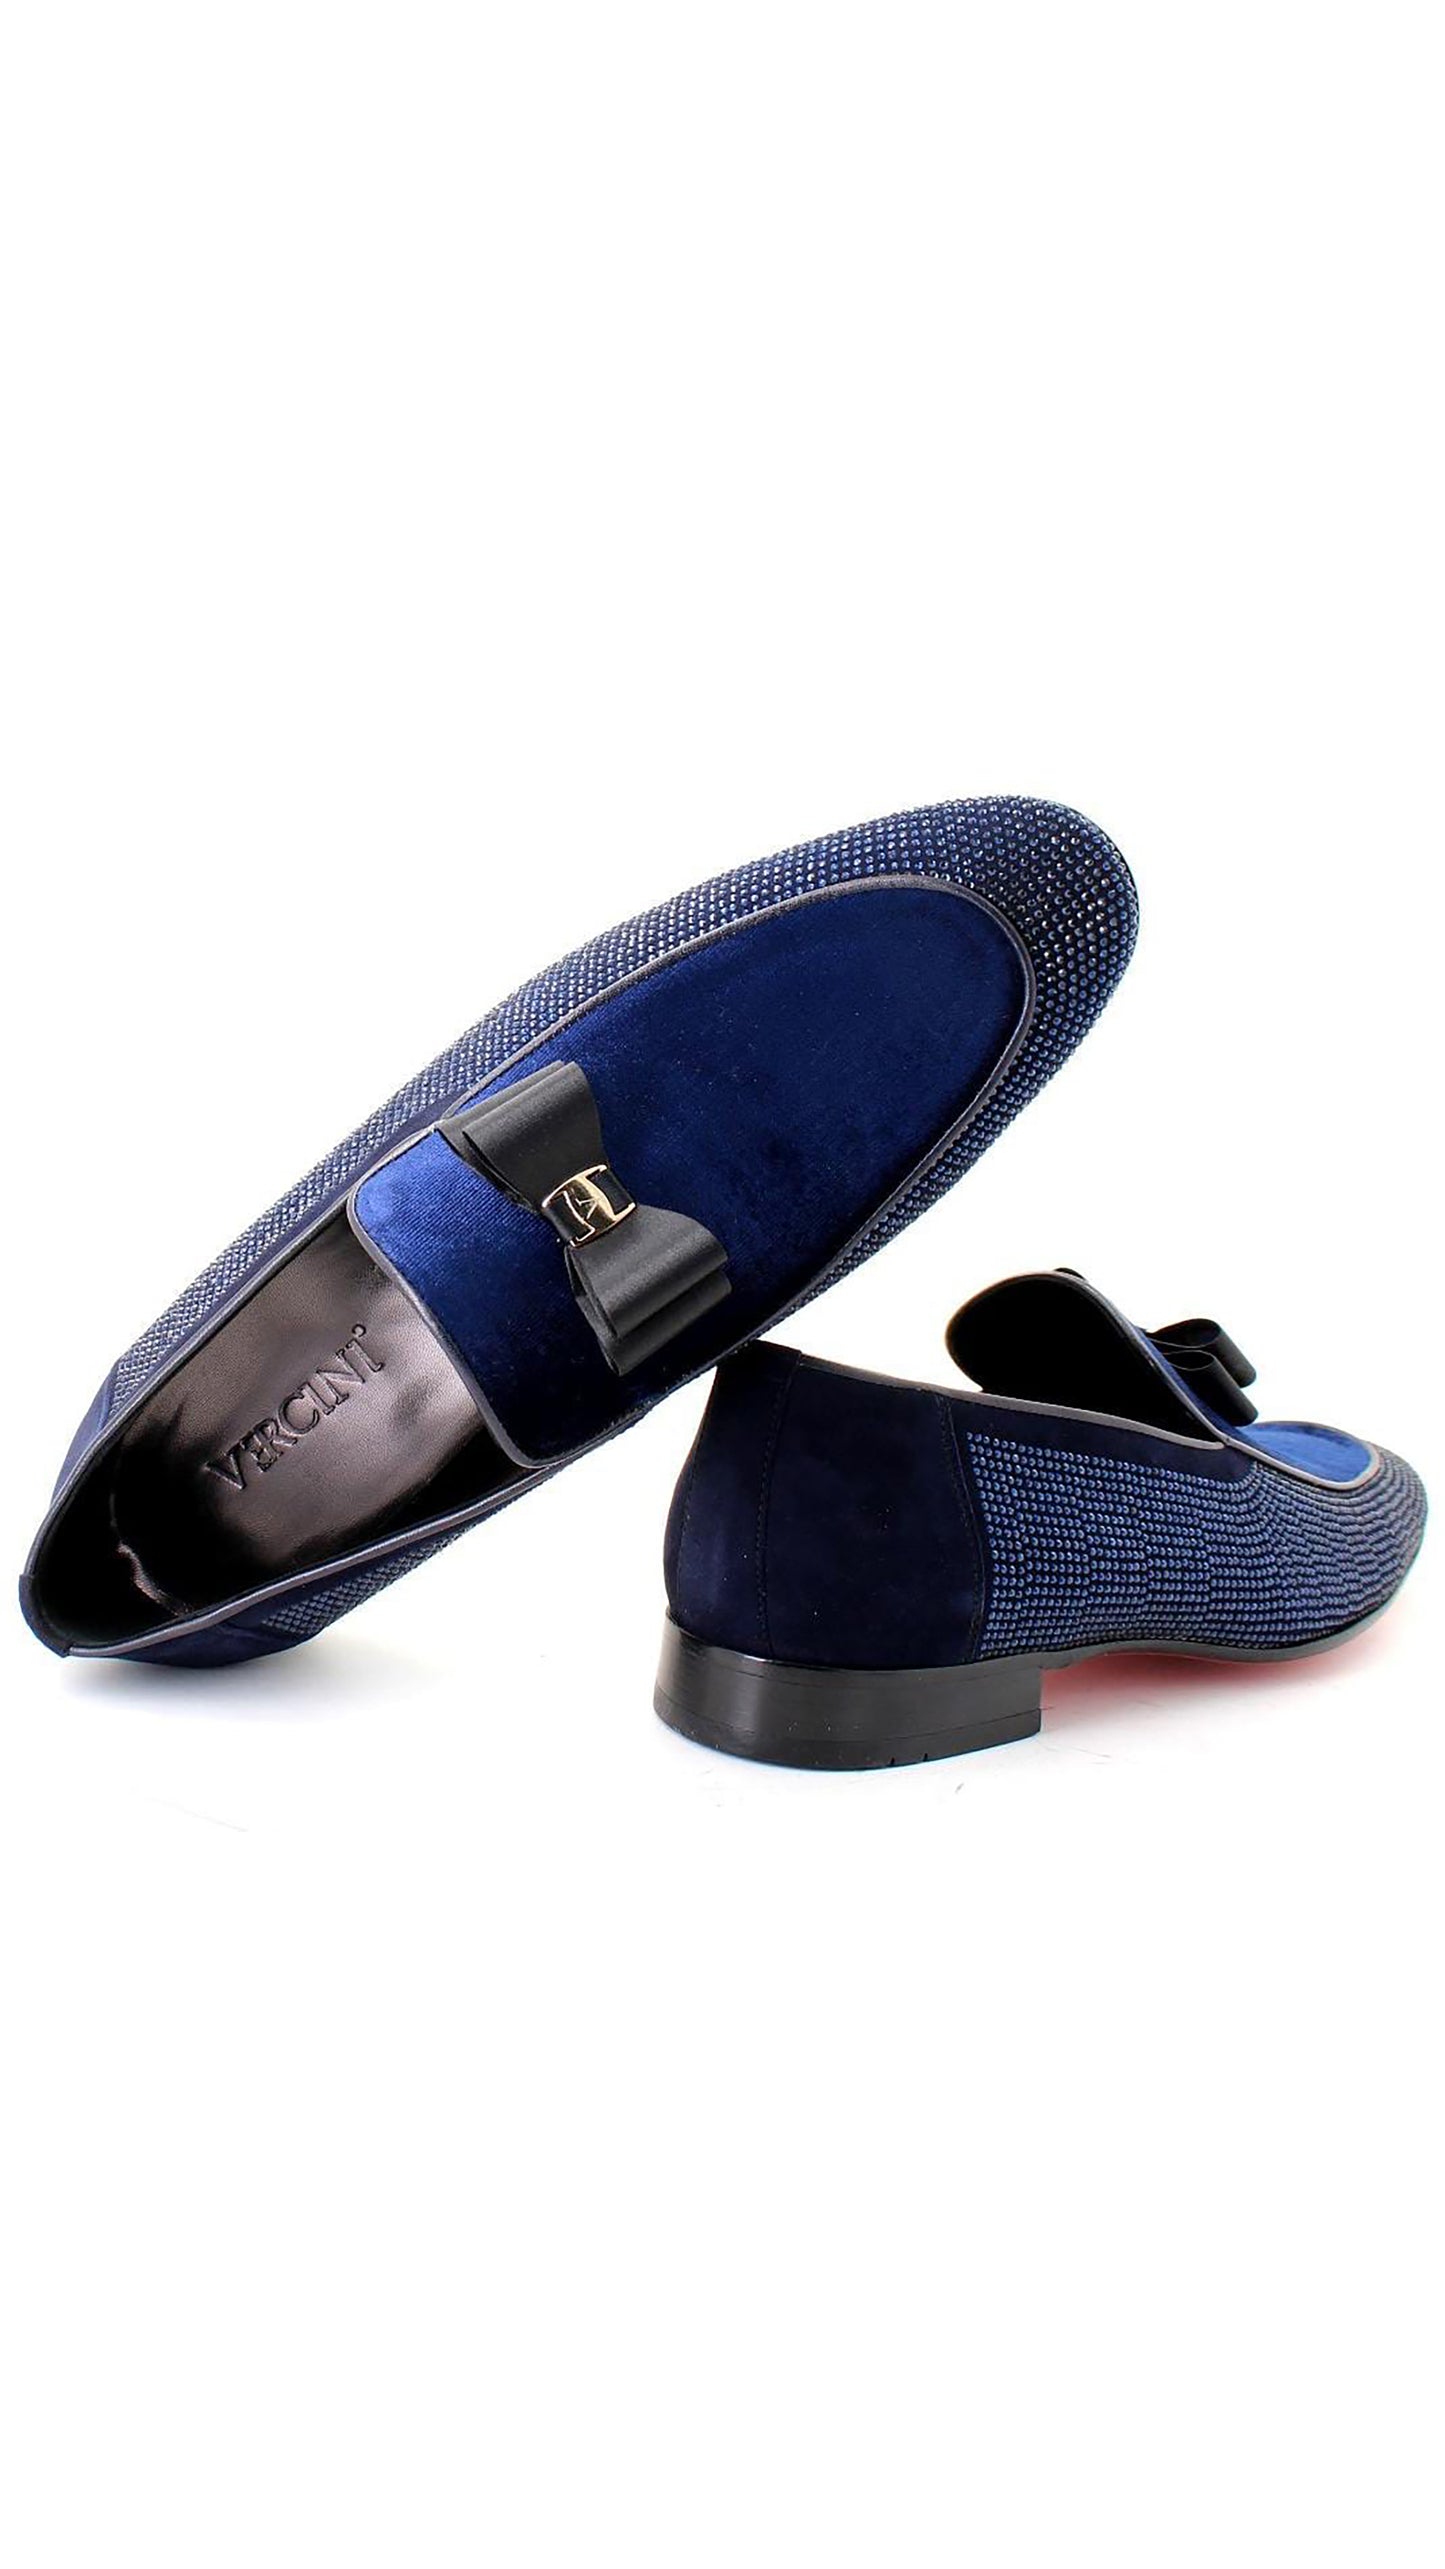 Vercini Sapphire Elegance Loafers SHOES Shoe Collection Vercini